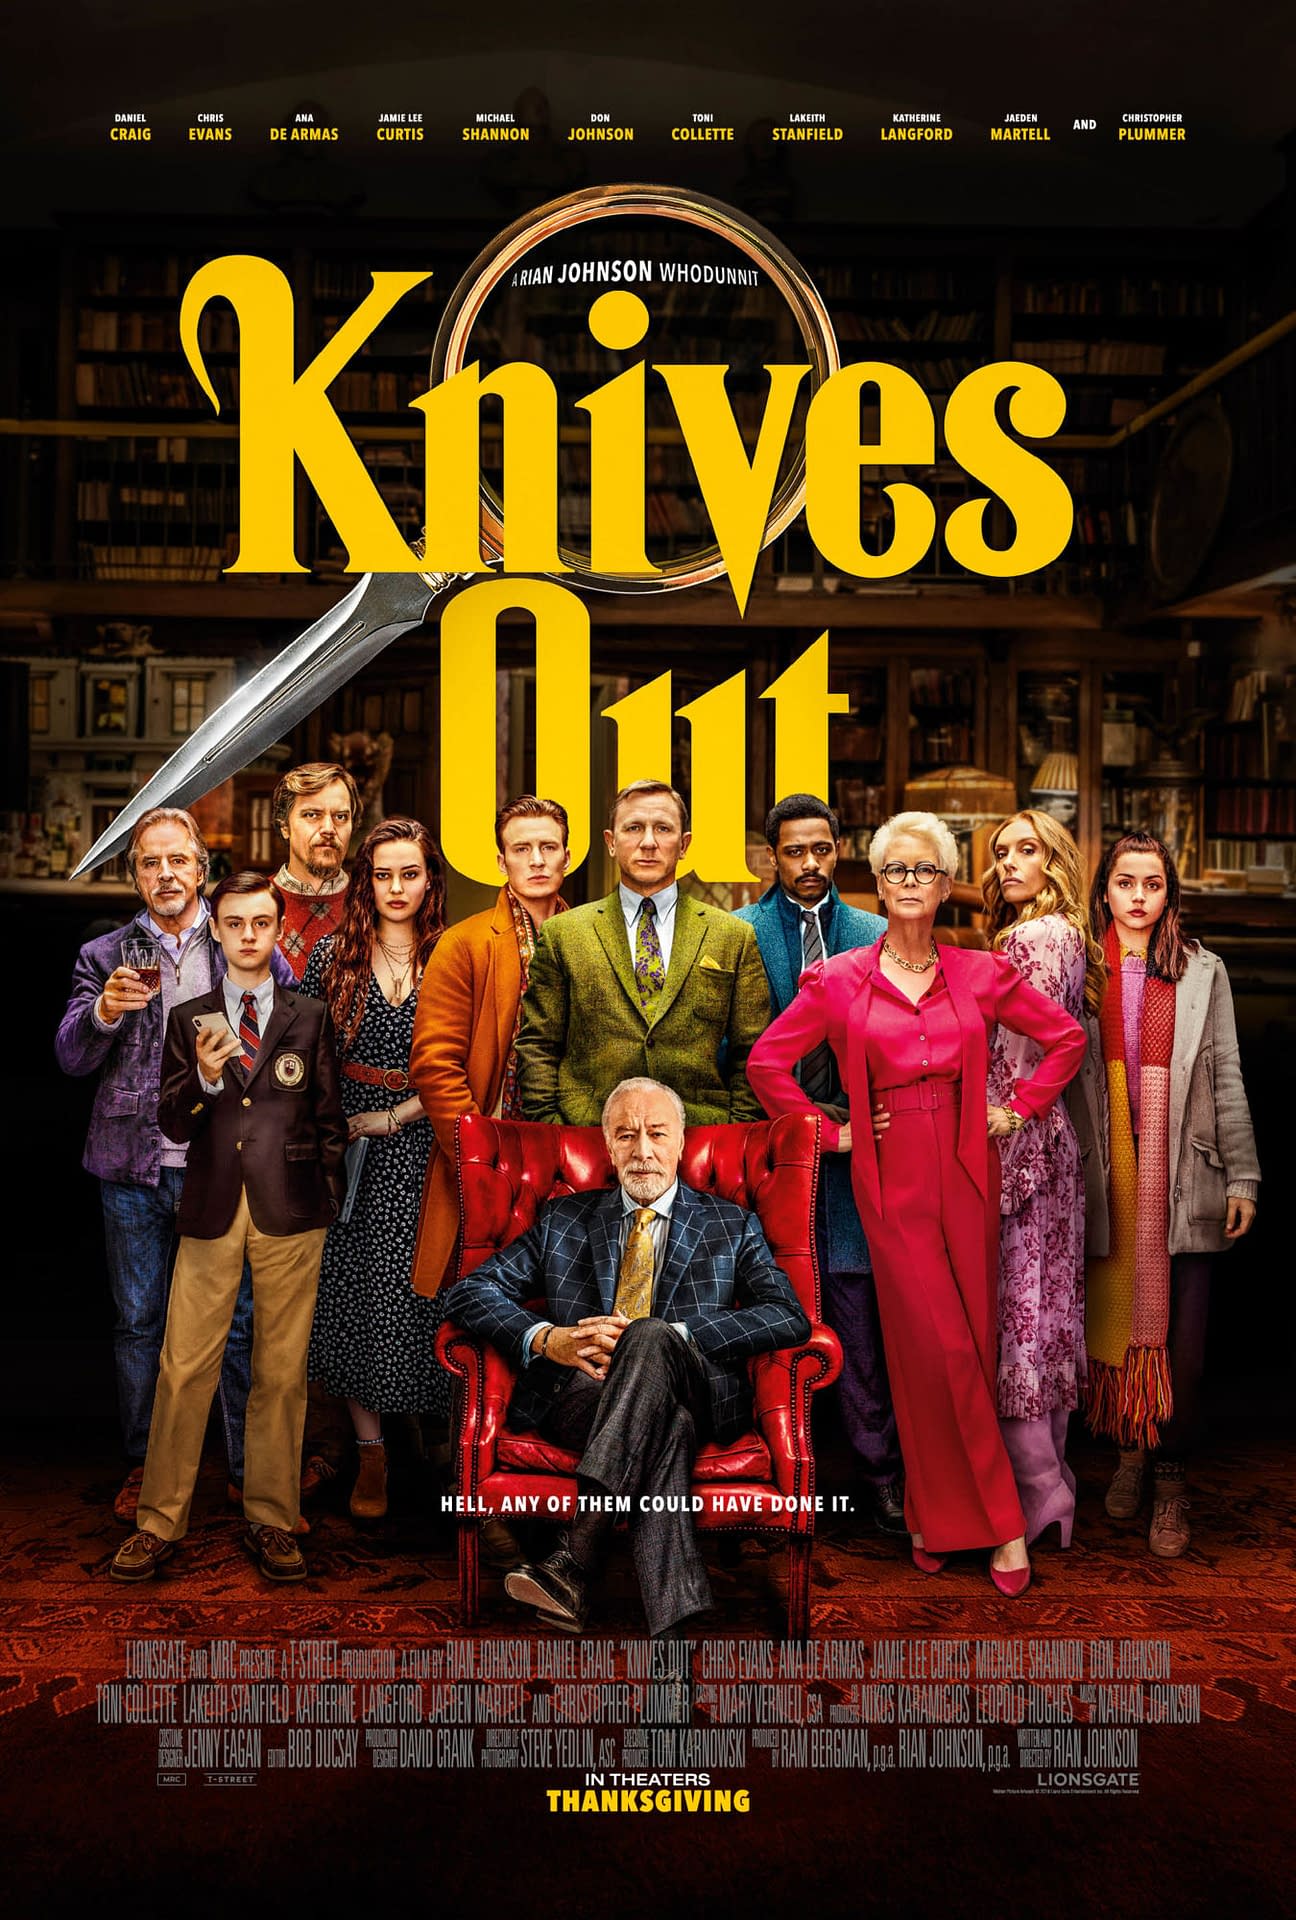 New Trailer and Poster for Rian Johnson's "Knives Out"